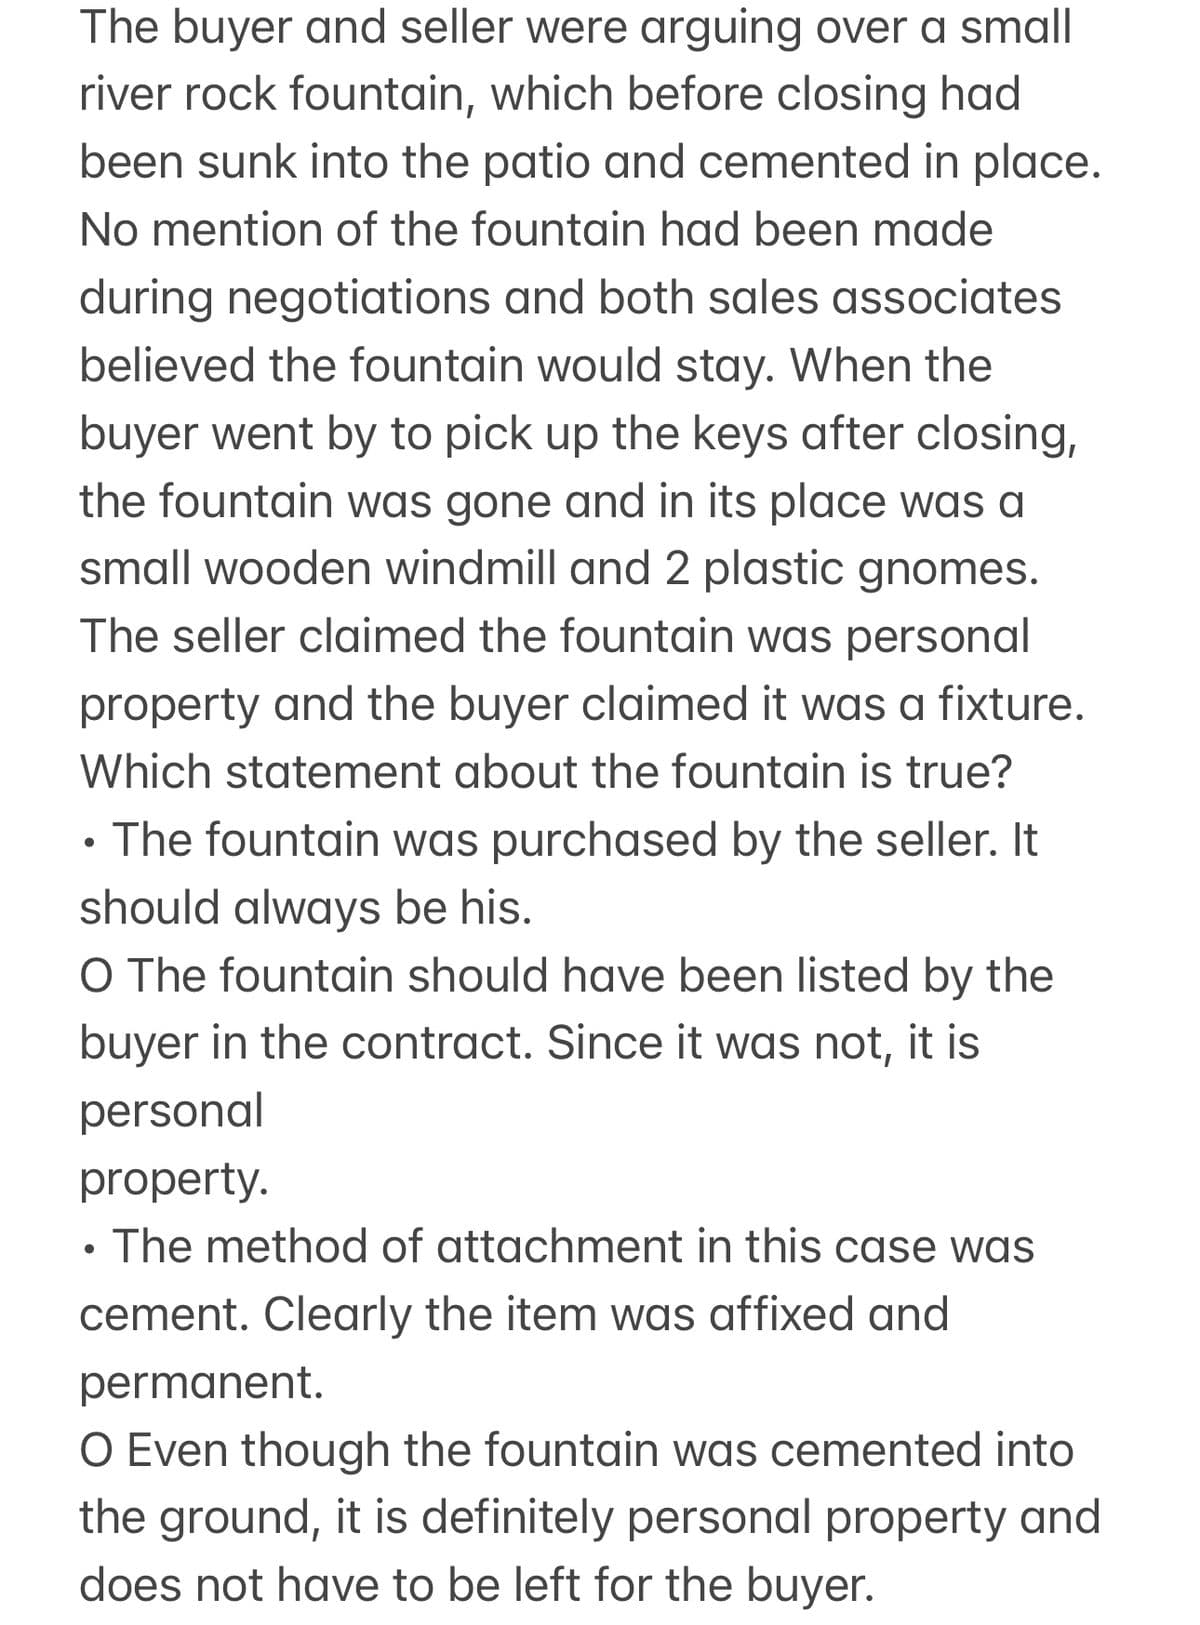 The buyer and seller were arguing over a small
river rock fountain, which before closing had
been sunk into the patio and cemented in place.
No mention of the fountain had been made
during negotiations and both sales associates
believed the fountain would stay. When the
buyer went by to pick up the keys after closing,
the fountain was gone and in its place was a
small wooden windmill and 2 plastic gnomes.
The seller claimed the fountain was personal
property and the buyer claimed it was a fixture.
Which statement about the fountain is true?
.
• The fountain was purchased by the seller. It
should always be his.
O The fountain should have been listed by the
buyer in the contract. Since it was not, it is
personal
property.
•
The method of attachment in this case was
cement. Clearly the item was affixed and
permanent.
O Even though the fountain was cemented into
the ground, it is definitely personal property and
does not have to be left for the buyer.